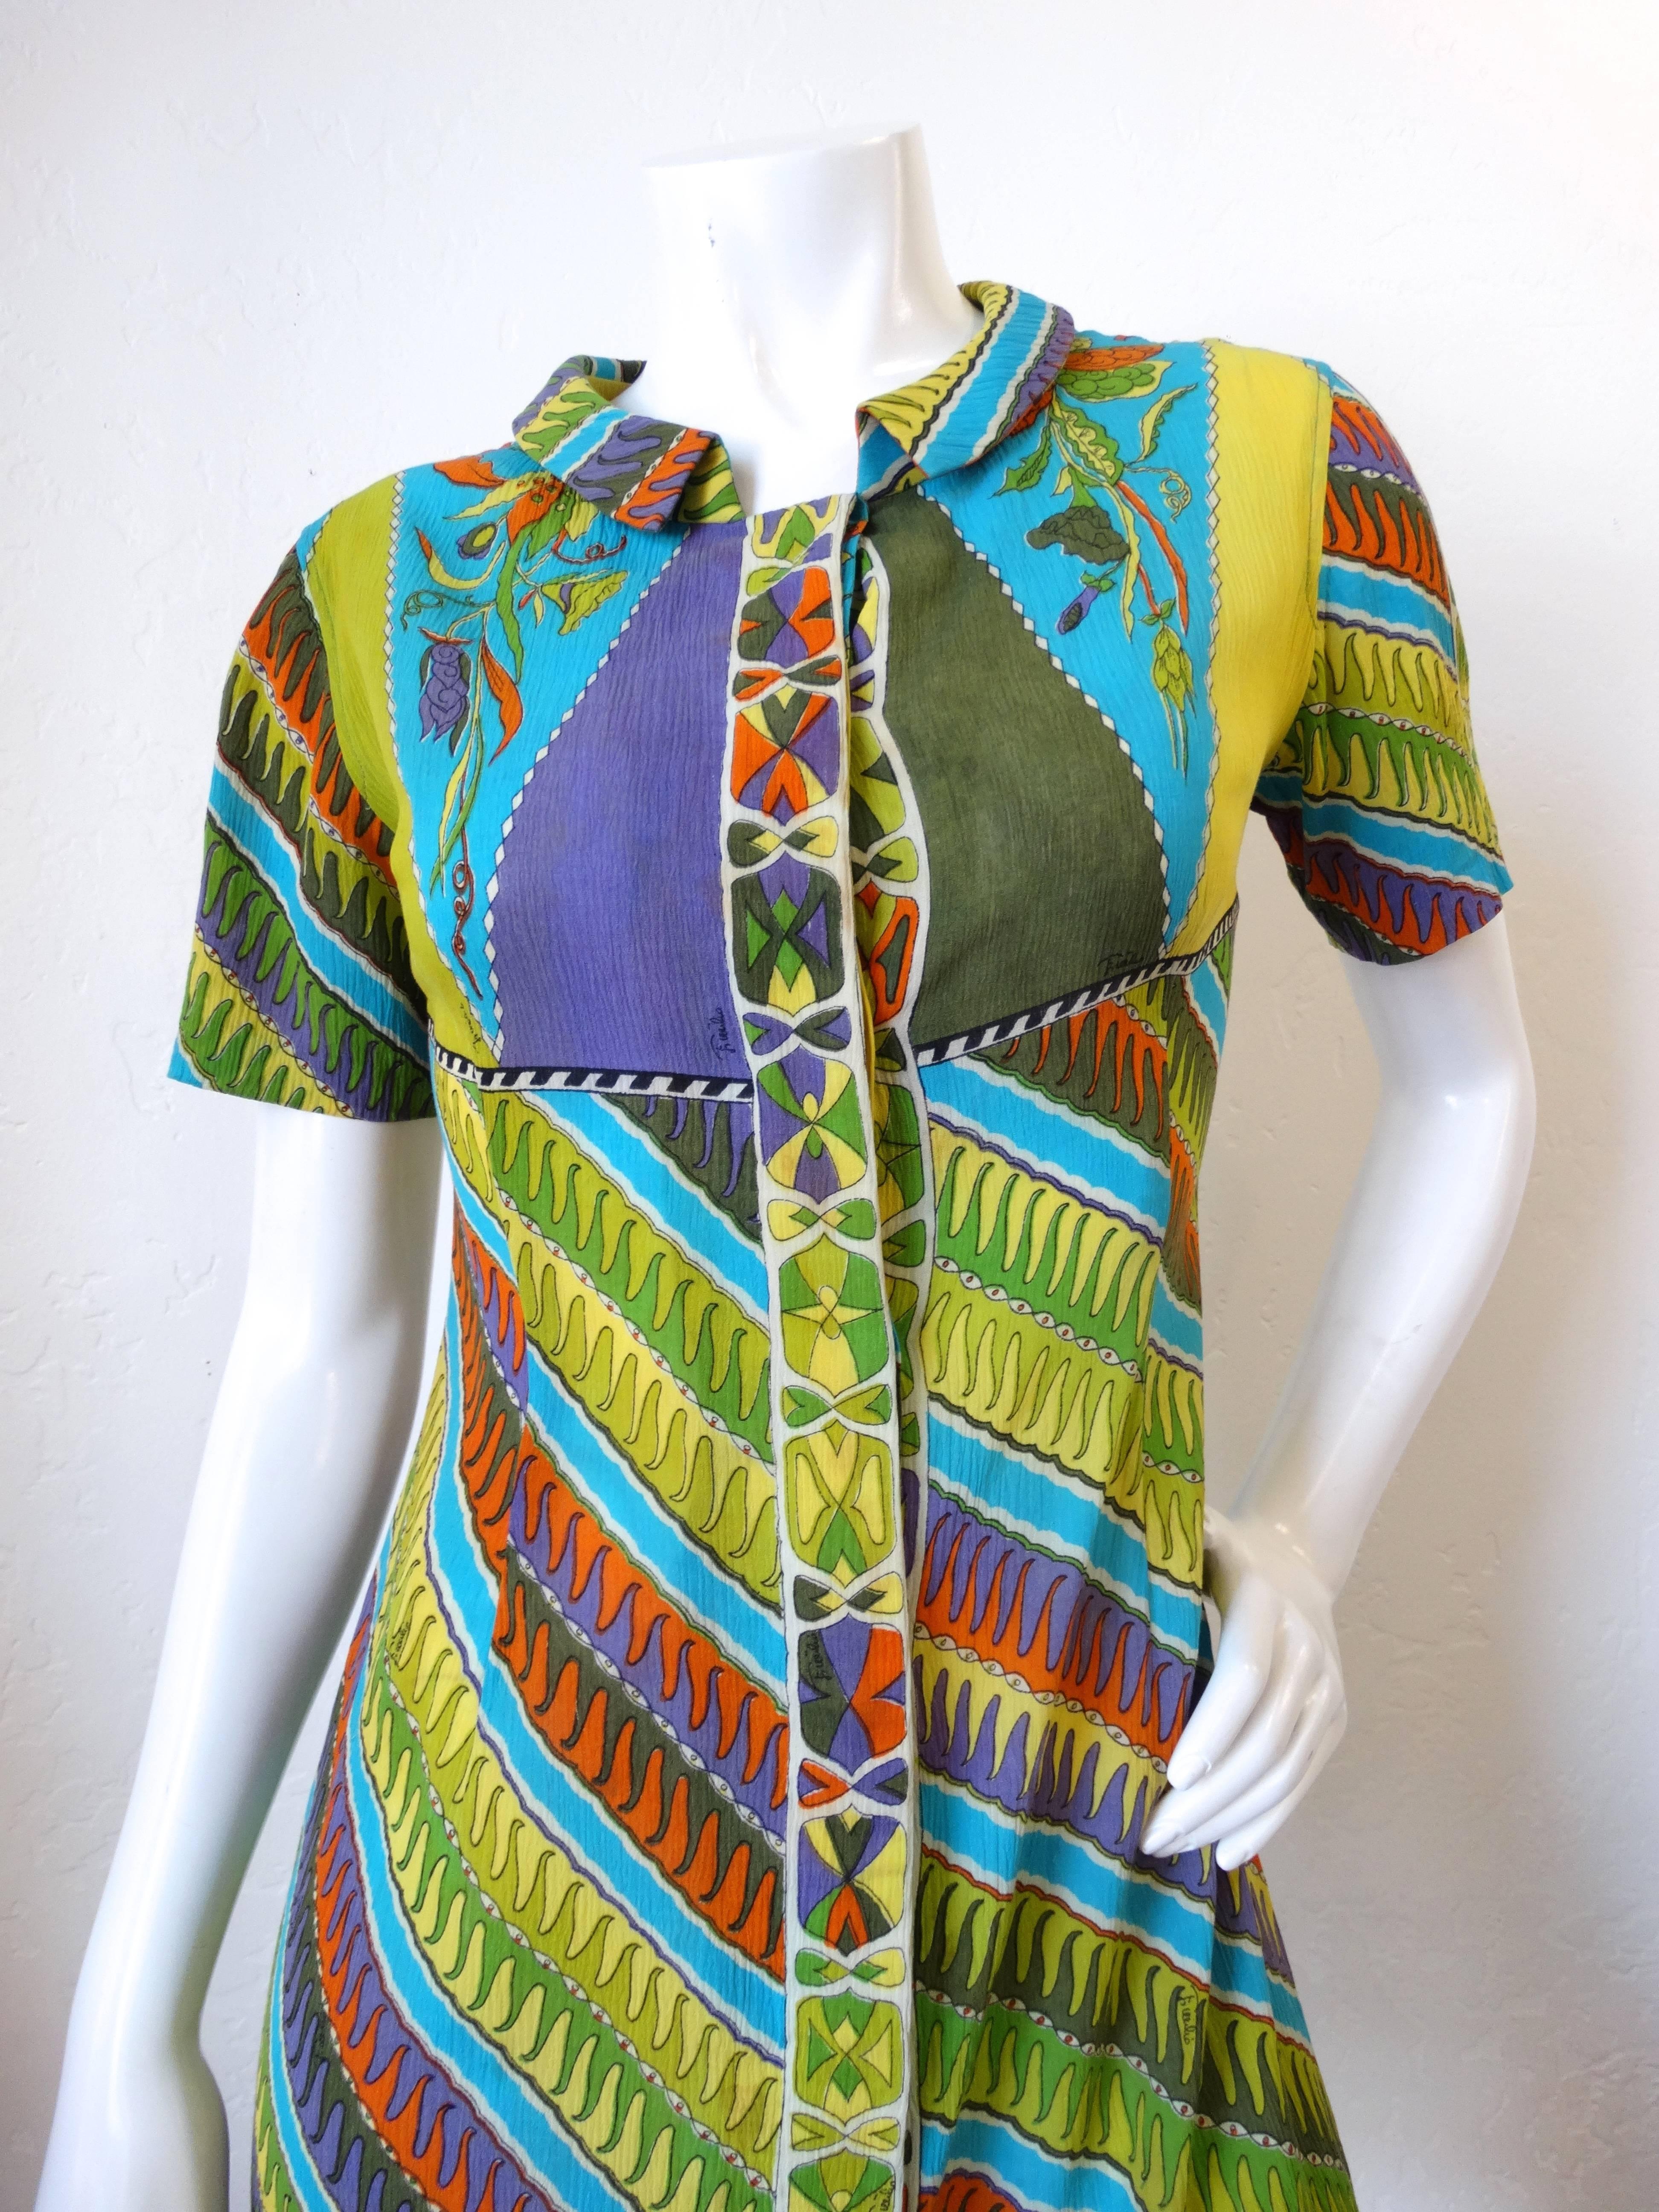 Incredible timeless 1960's Emilio Pucci Printed Mini Cotton Dress! Graphic geometric stripe iconic multi colored print. Buttons up the front with snap closures at the neckline. Short sleeves, mini fit. 100% cotton marked size 12 on dress but vintage